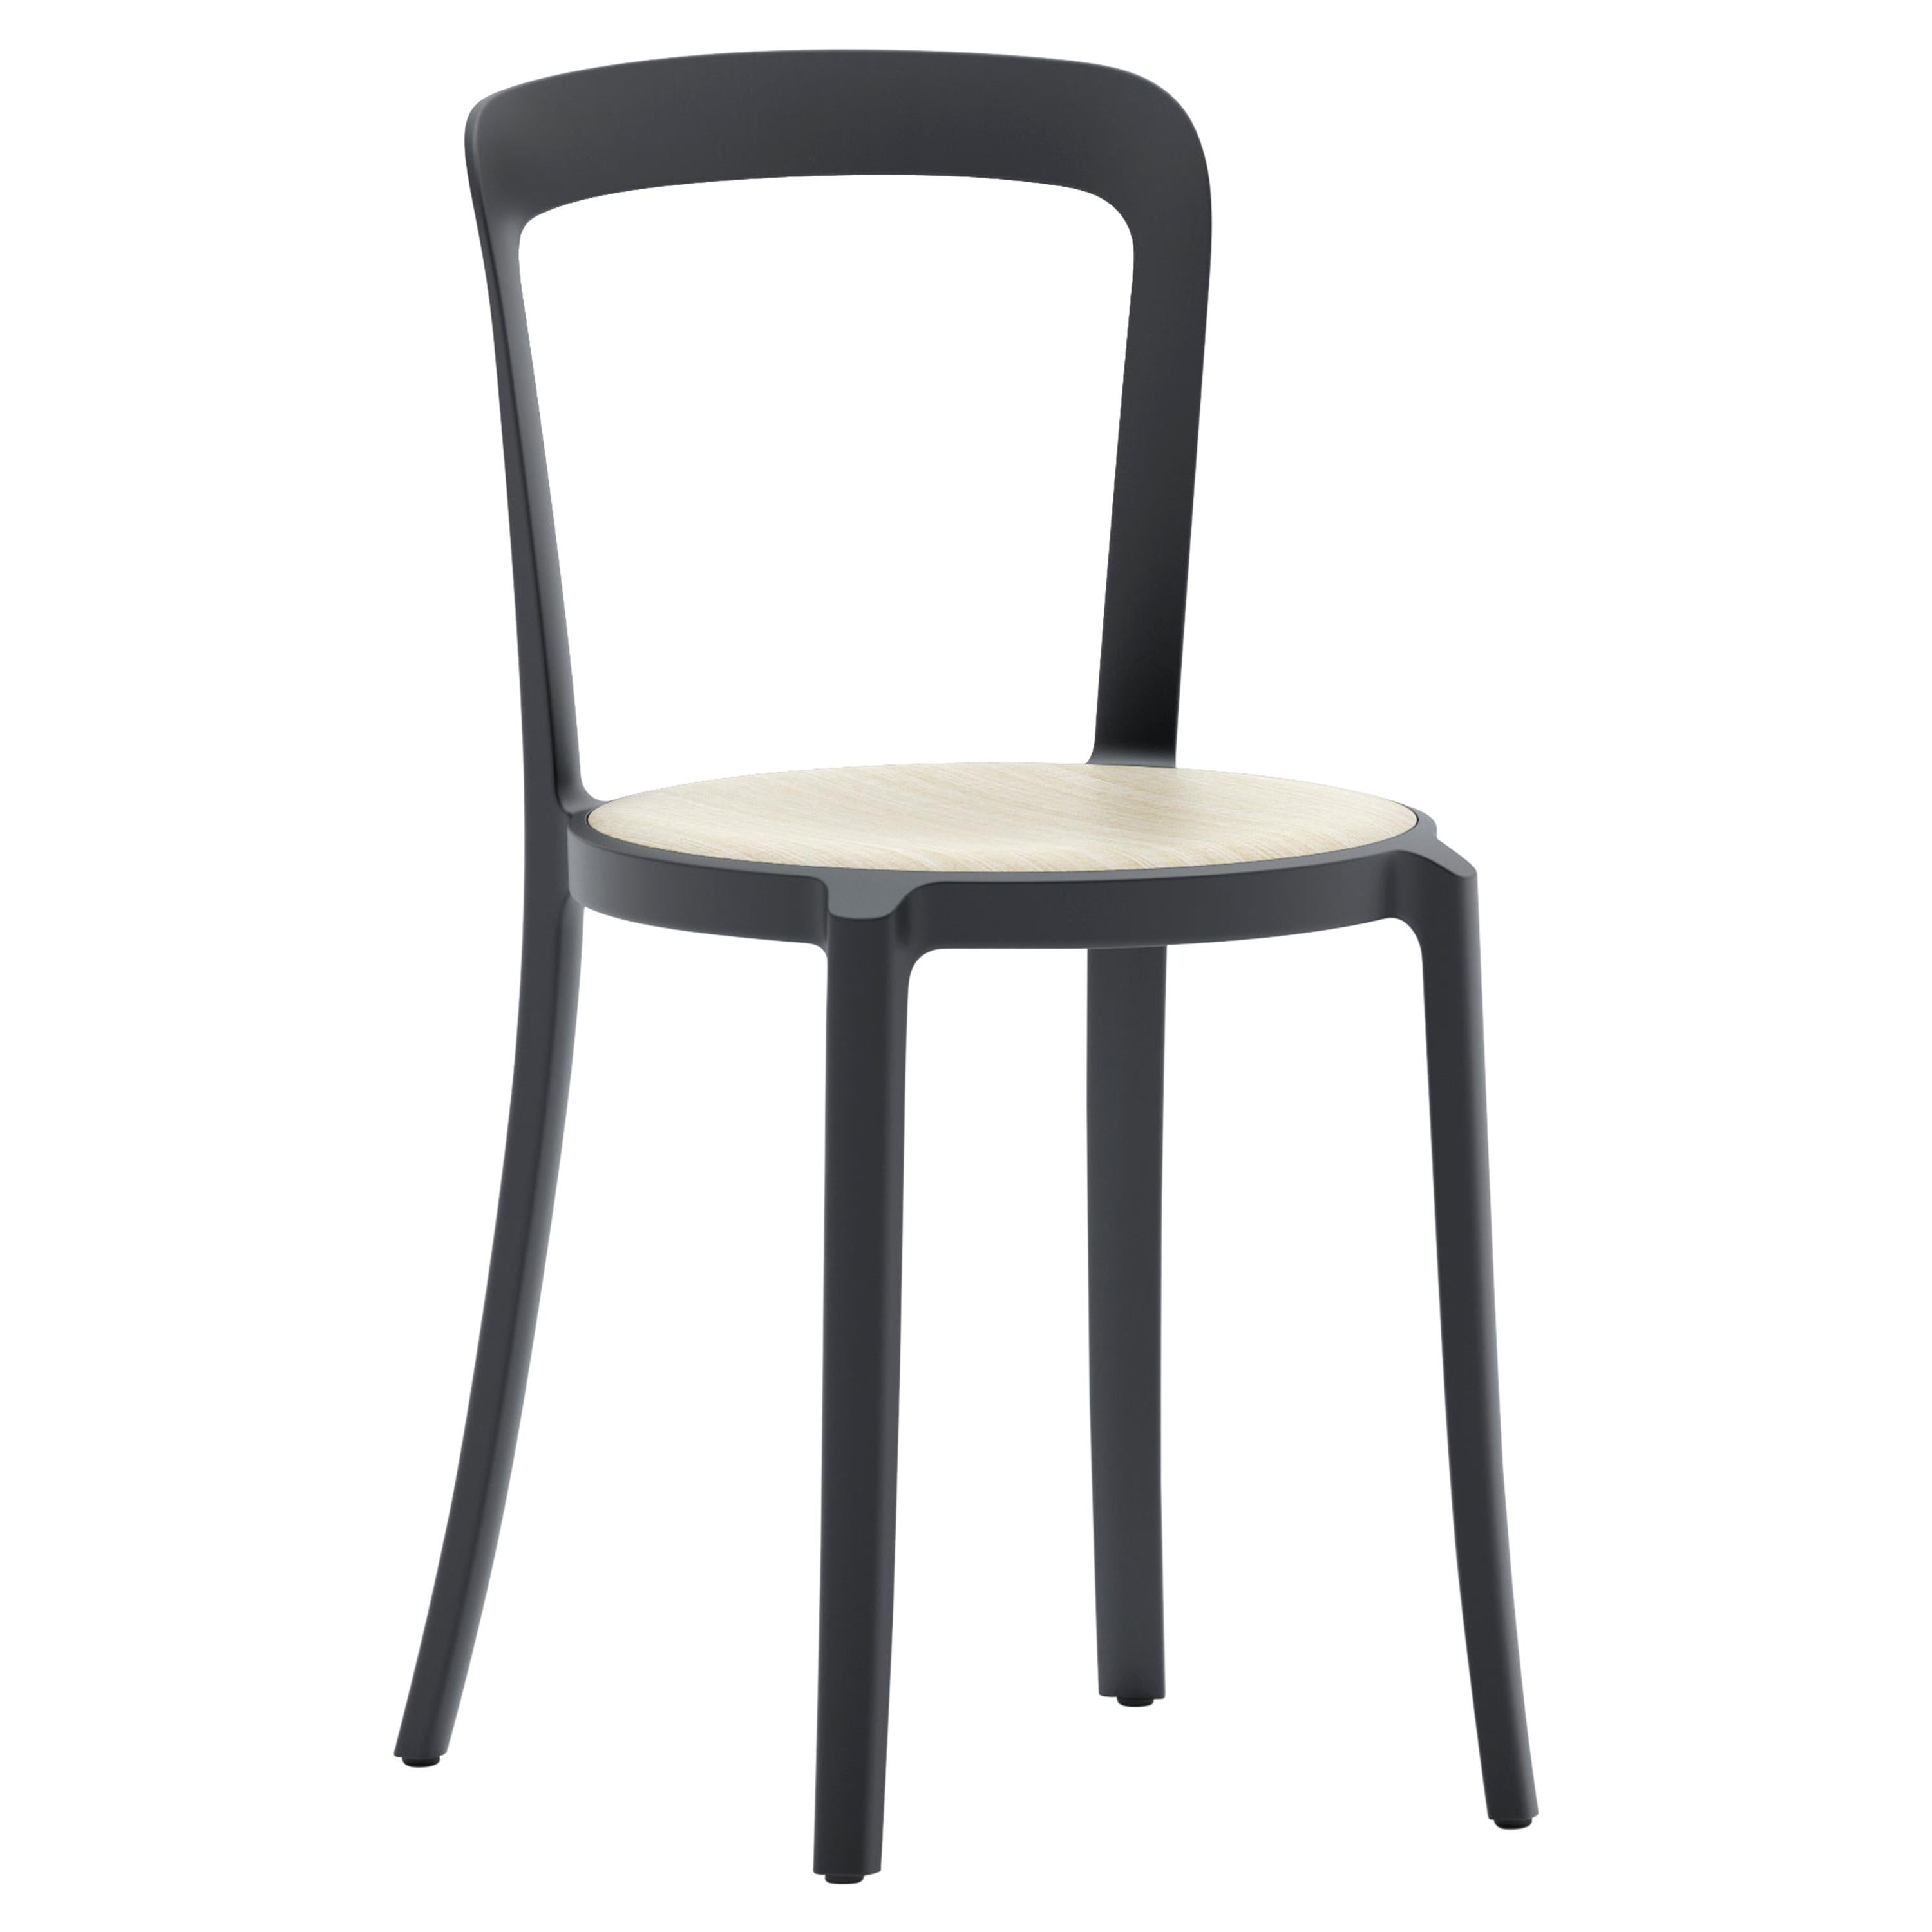 Emeco On & On Stacking Chair in Black with Ash Plywood seat by Barber & Osgerby For Sale